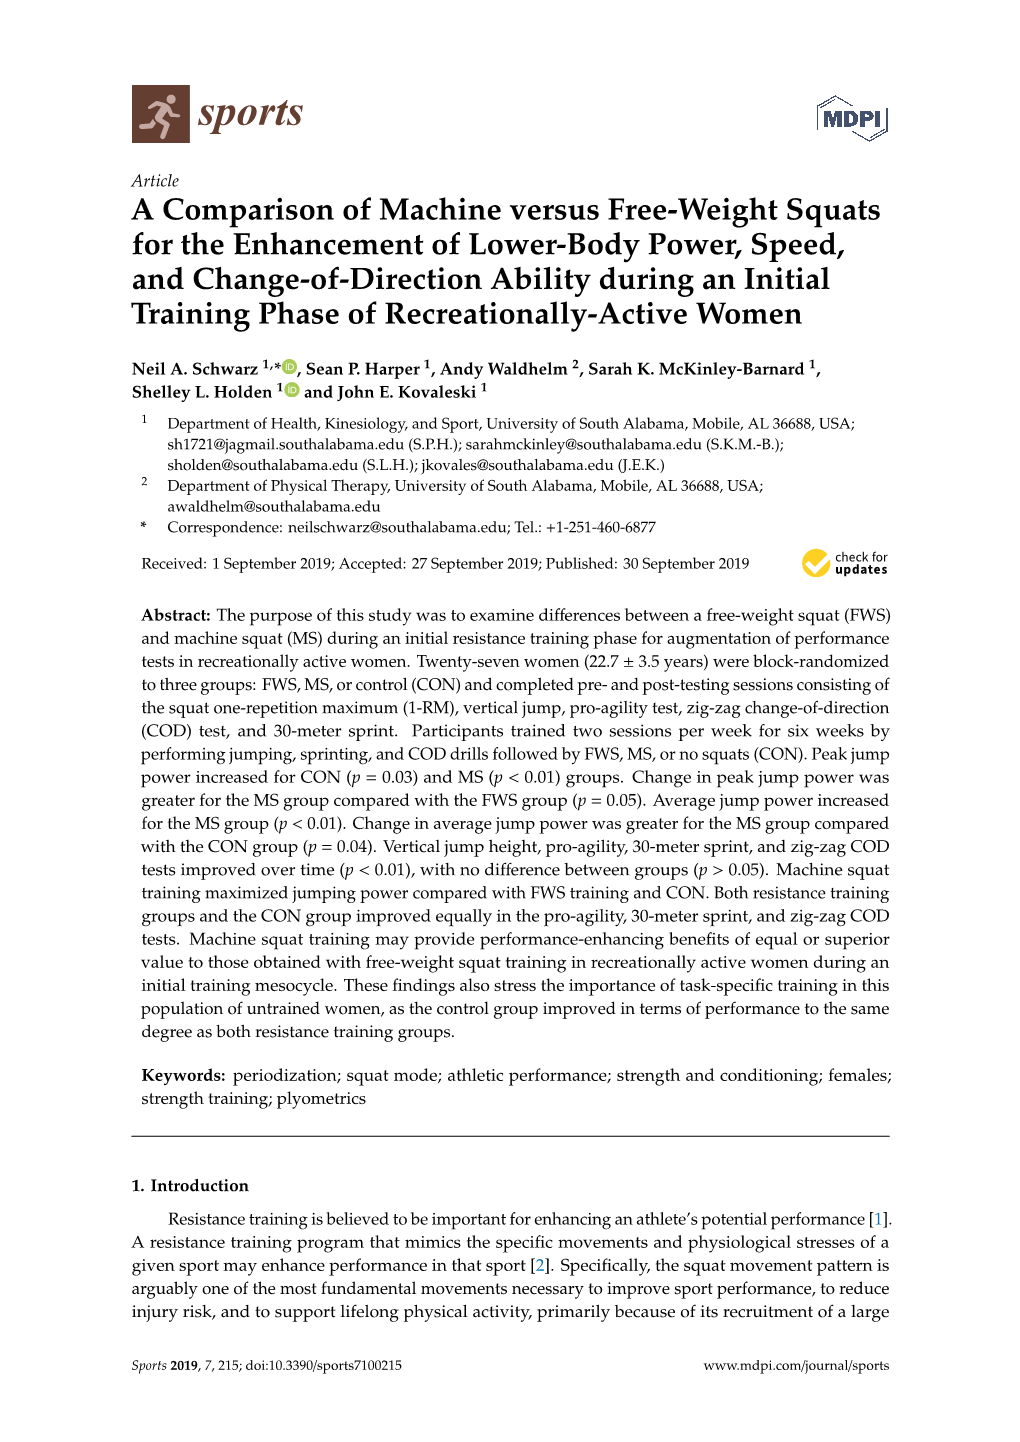 A Comparison of Machine Versus Free-Weight Squats for the Enhancement of Lower-Body Power, Speed, and Change-Of-Direction Abilit